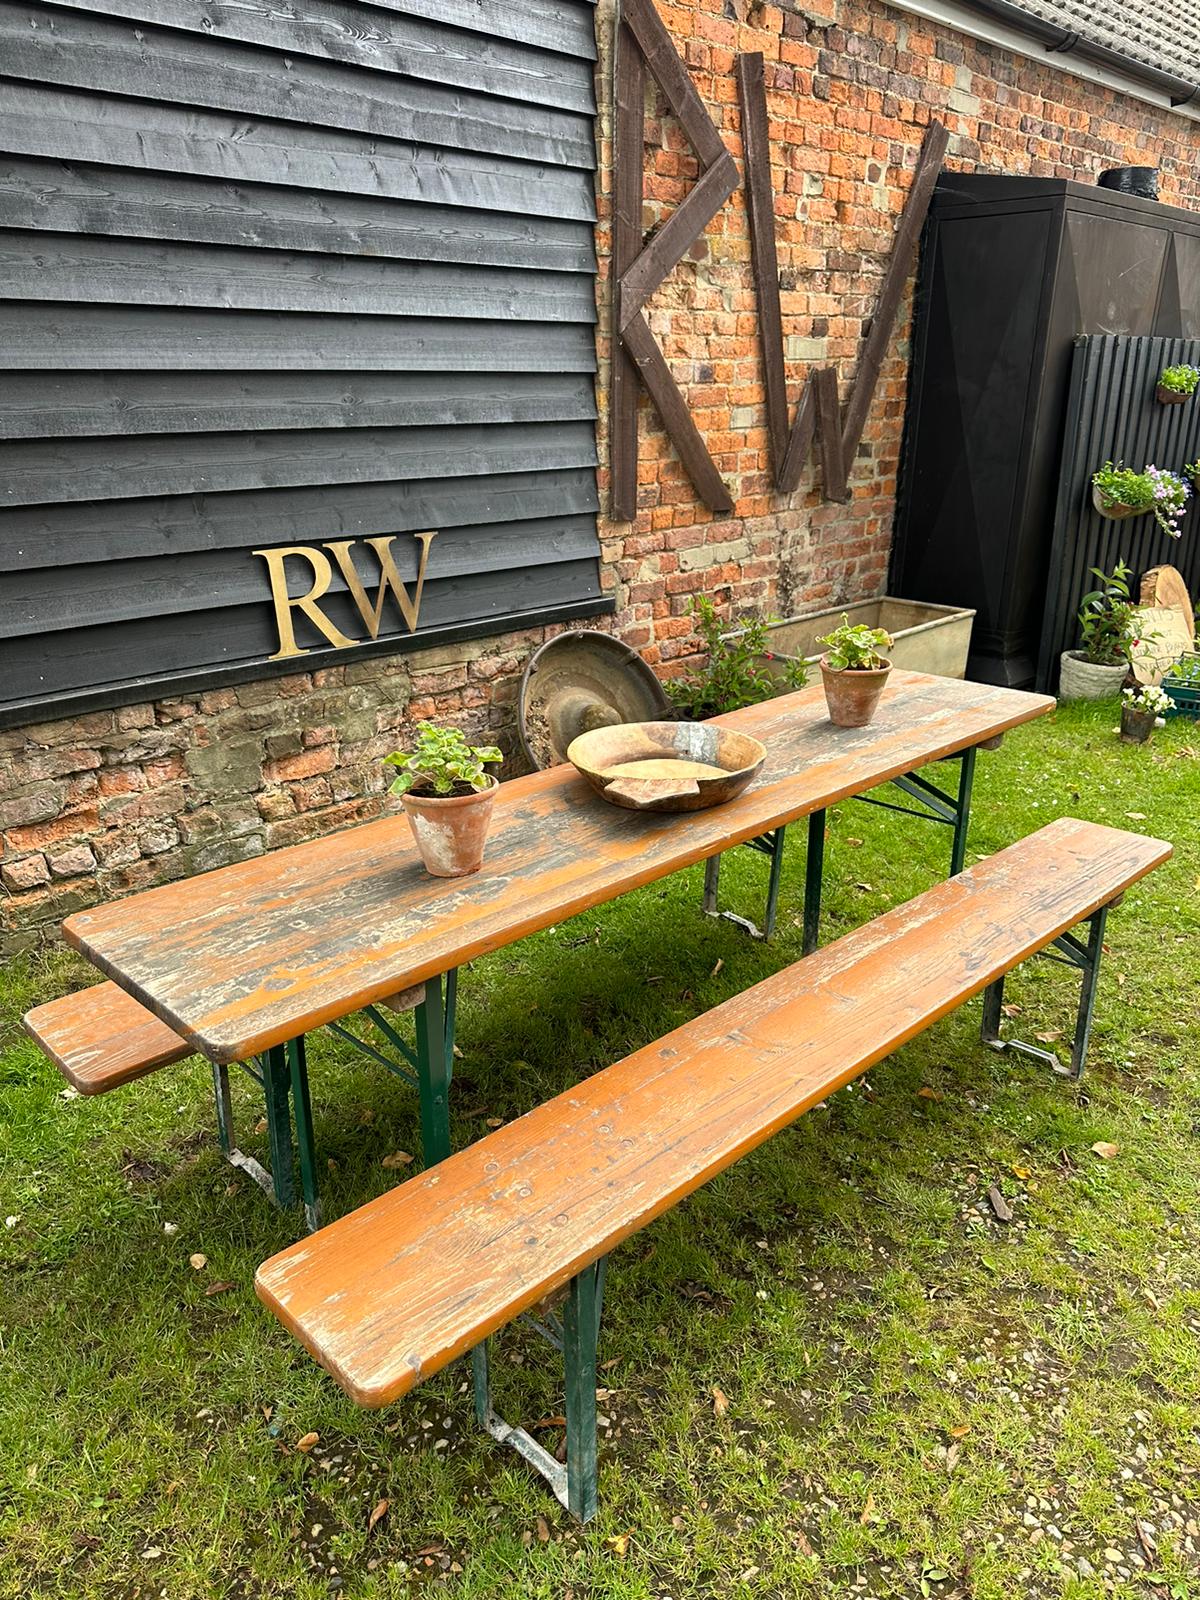 Beer Festival Fold Up Table & Benches / Picnic Table / Garden Furniture B